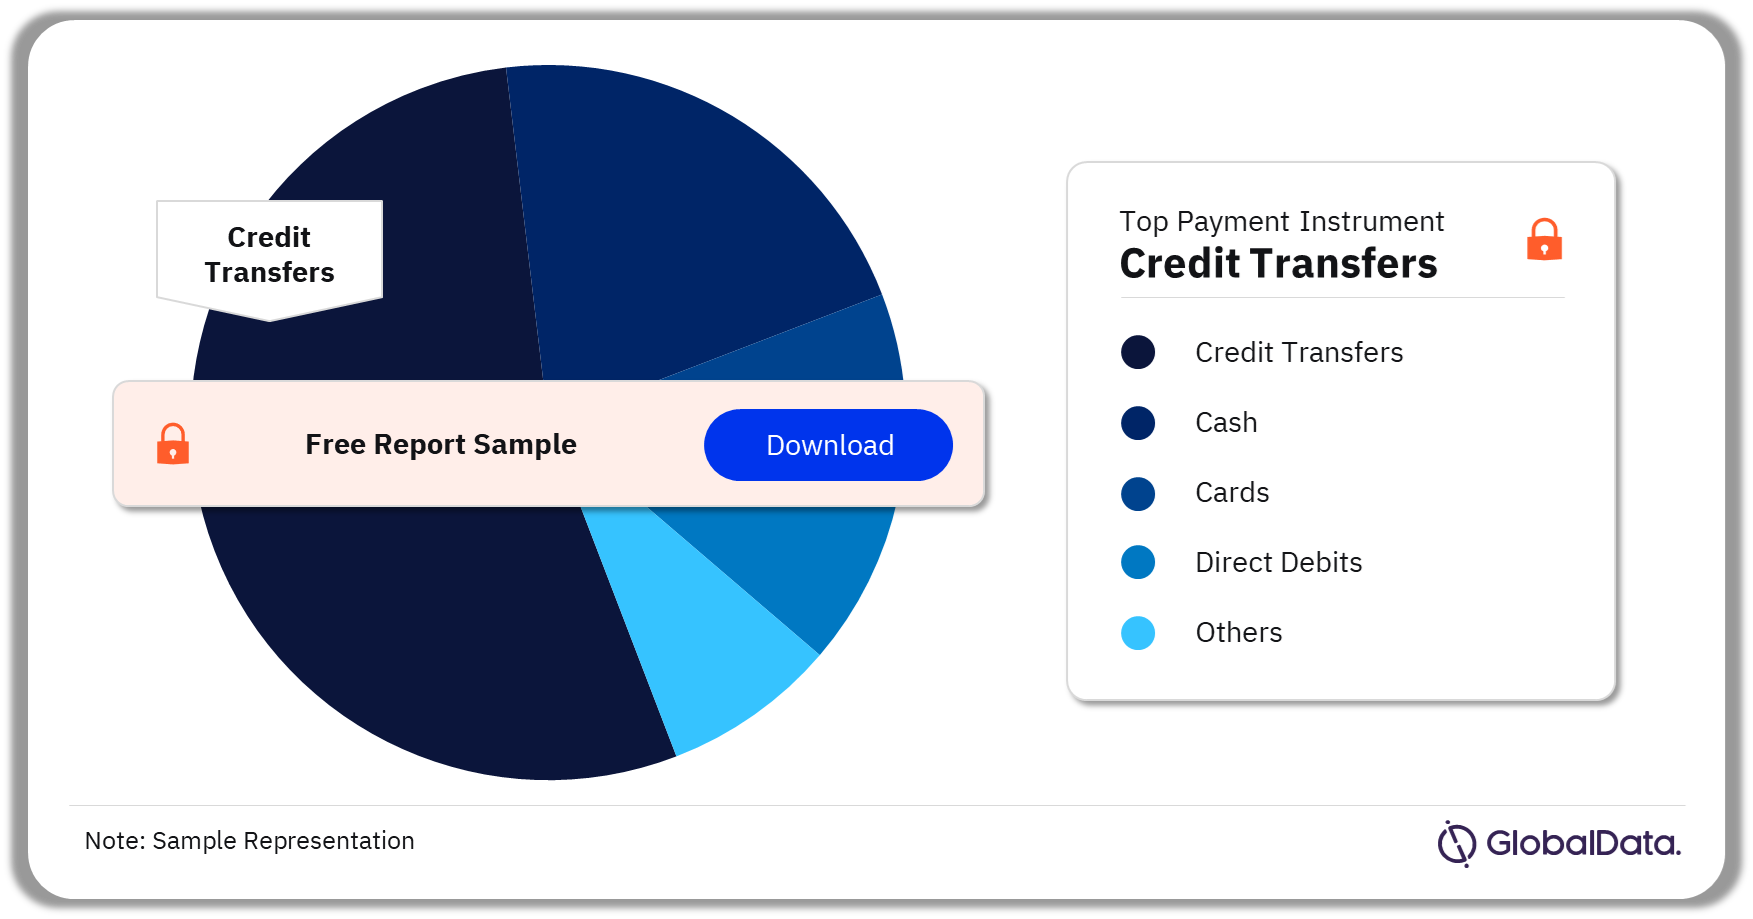 Bahrain Cards and Payments Market Segments Analysis by Payment Instruments, 2023 (%)